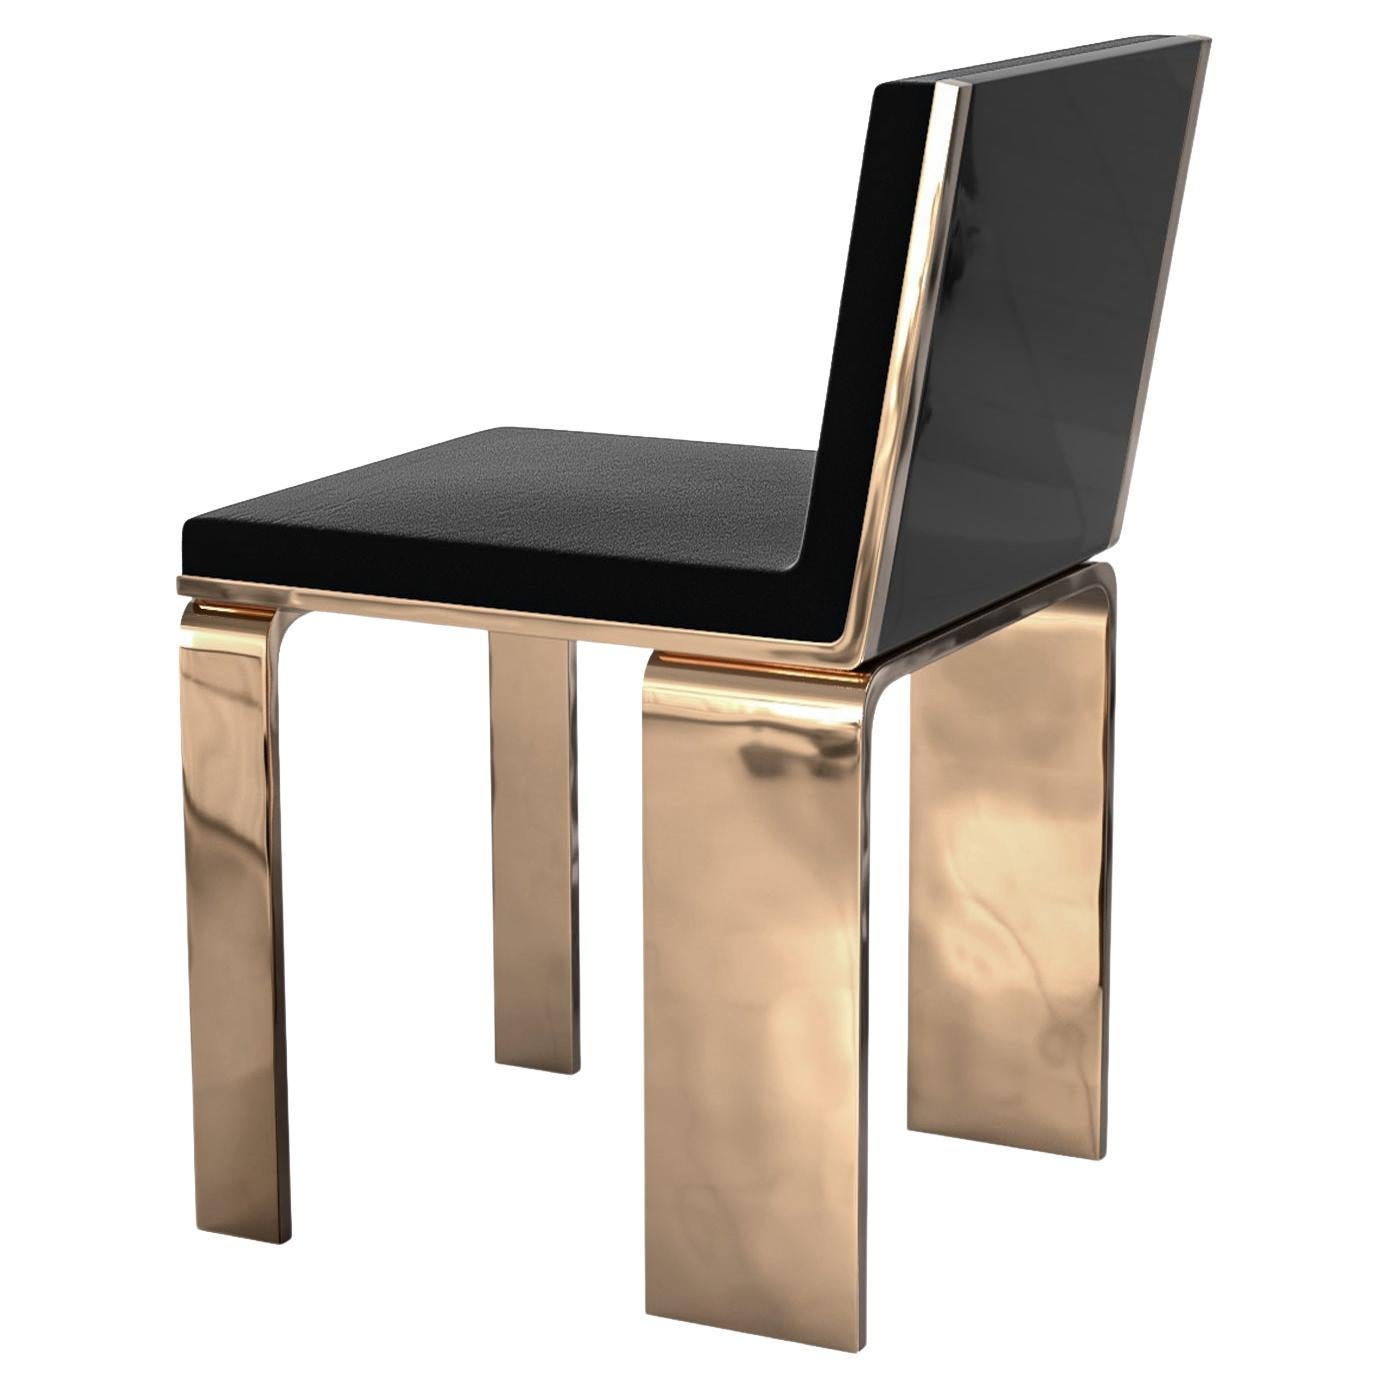 "Bianca" Chair with Bronze and Stainless Steel, Hand Crafted, Istanbul